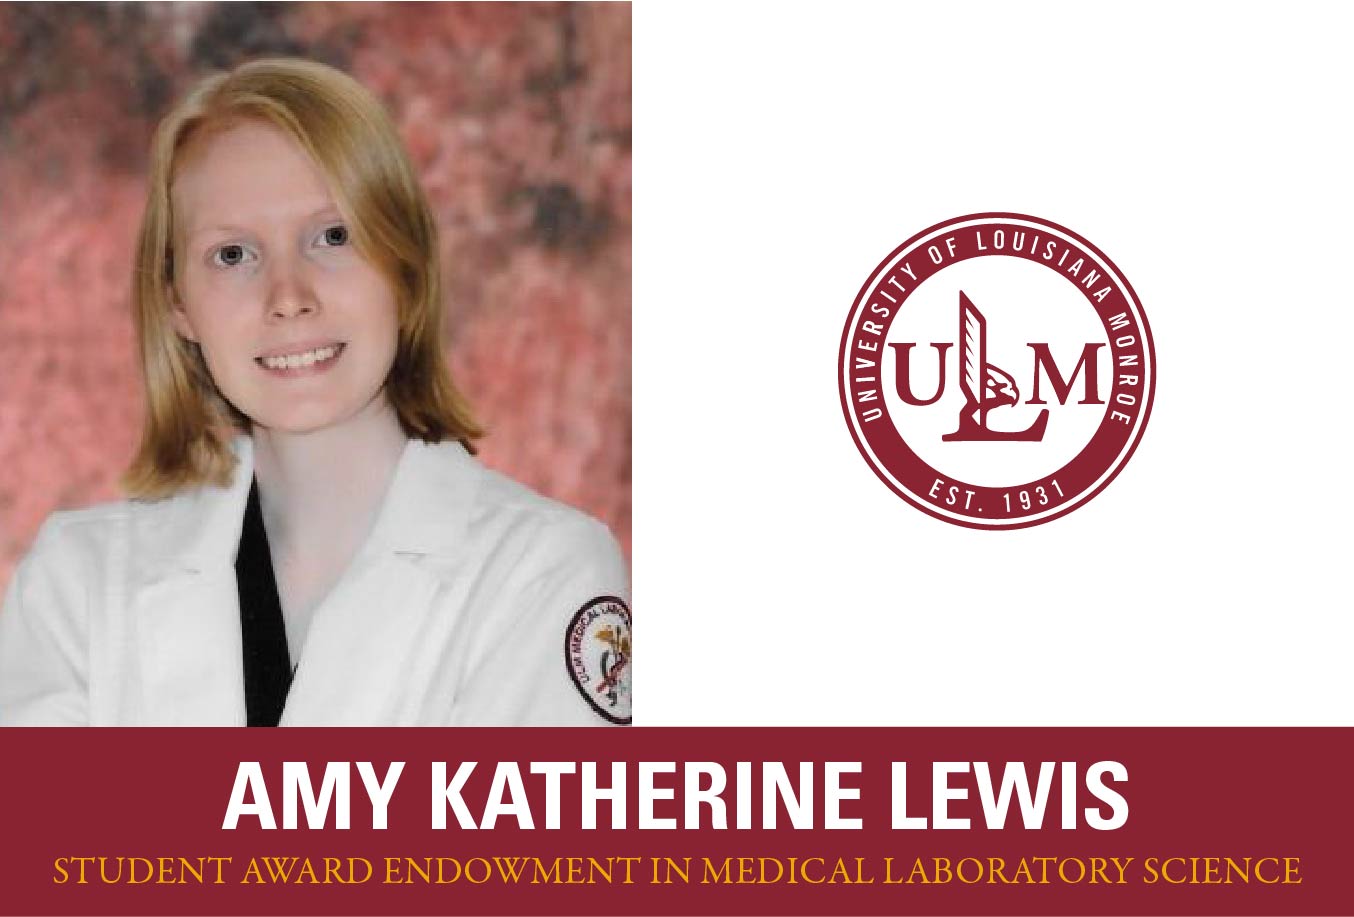 ULM Foundation receives $50K donation to create the Amy Katherine Lewis Student Award Endowment in Medical Laboratory Science